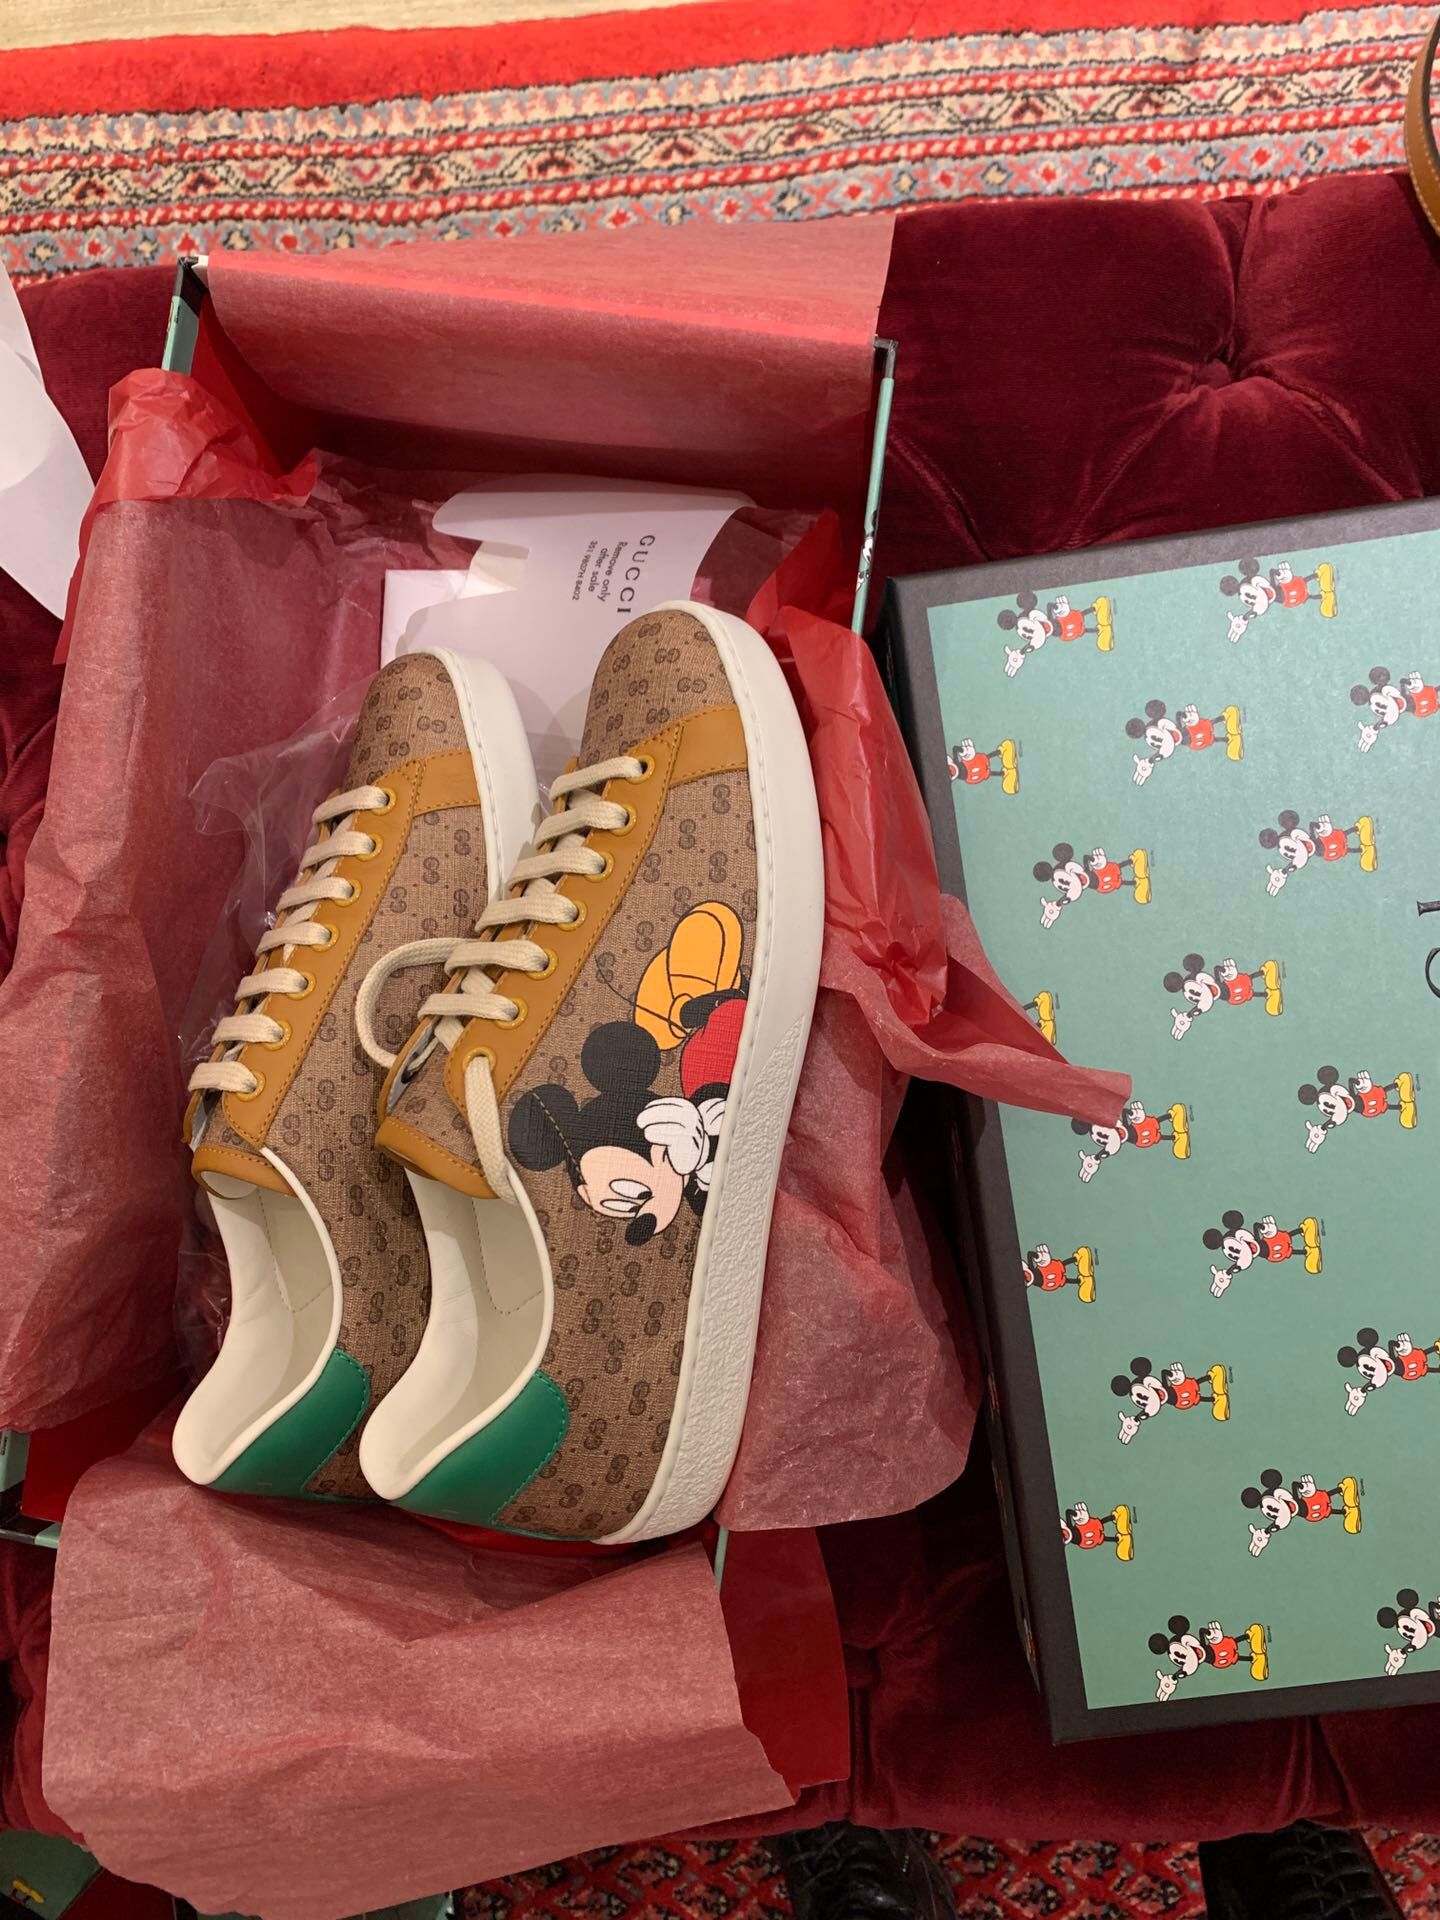 GUCCI ACE SNEAKERS Mickey Mouse. Gucci ace sneakers, Gucci sneakers, Gucci shoes outfit